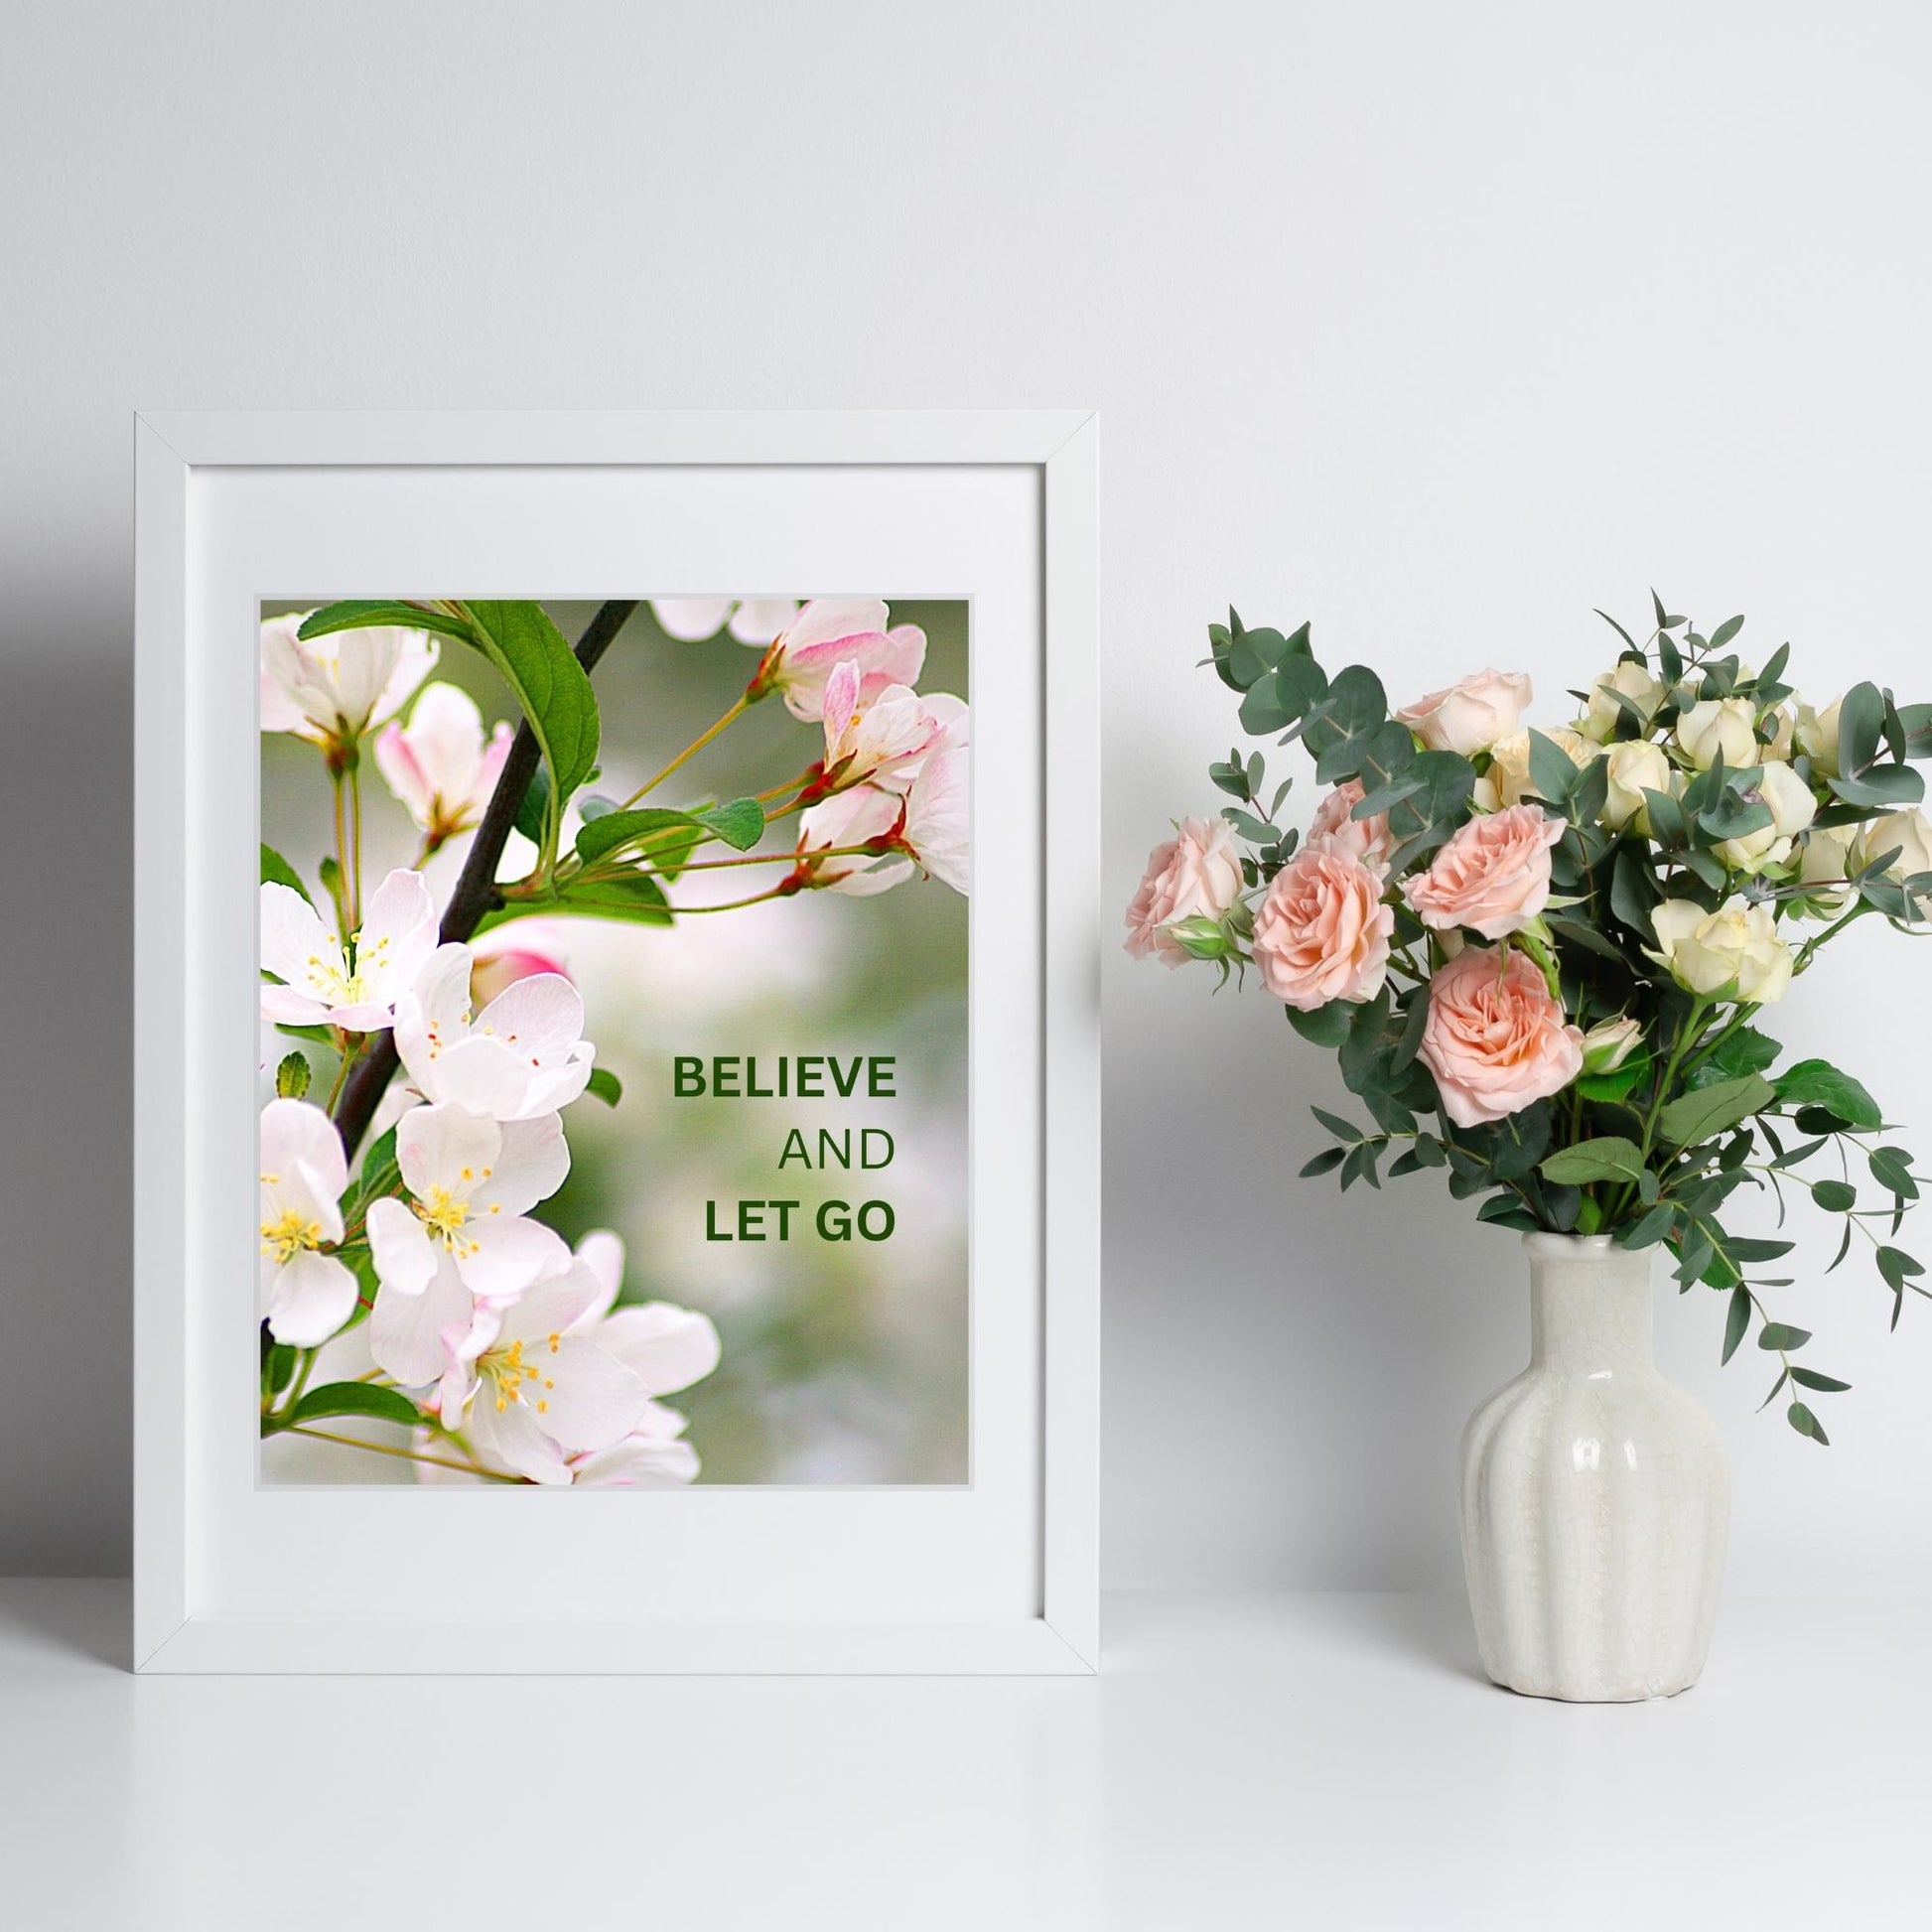 Inspirational Word Art - BELIEVE and LET GO - Pink and Green Floral Decor (8x10 print) | shown in white frame against white wall next to rose bouquet in vase | oak7west.com